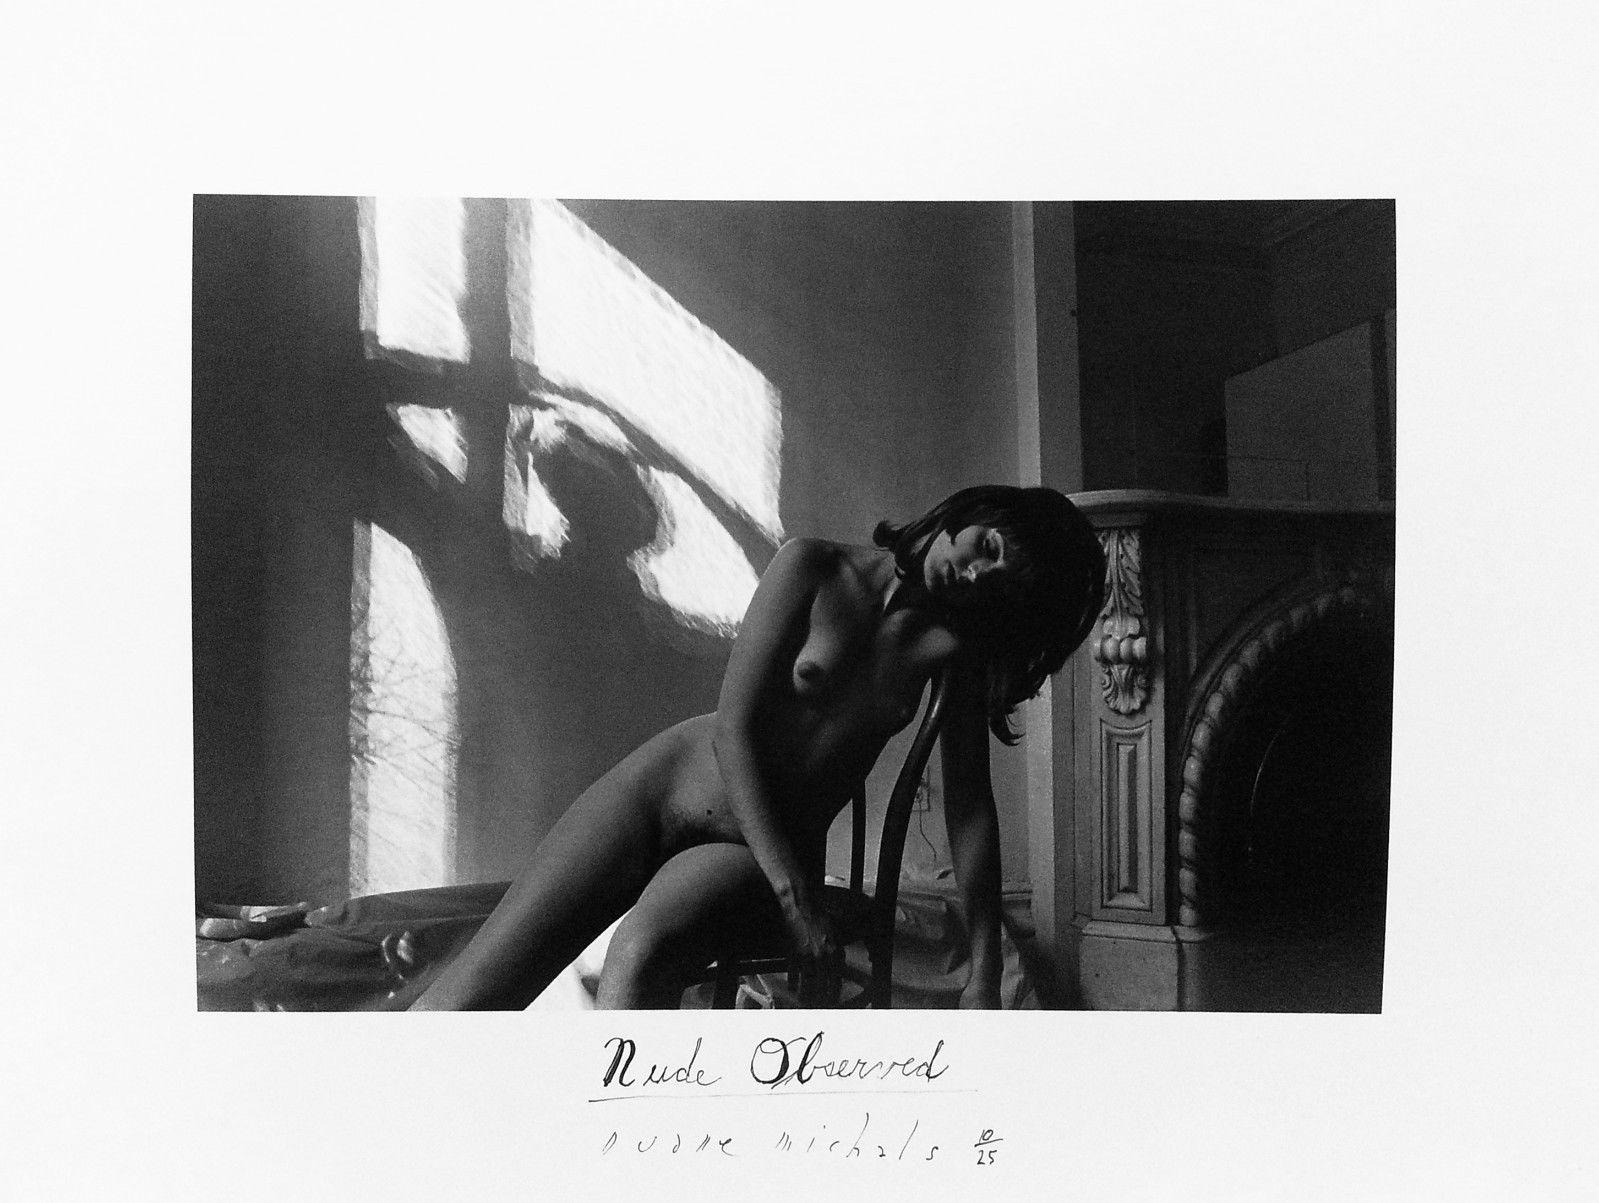 NUDE OBSERVED - Photograph by Duane Michals